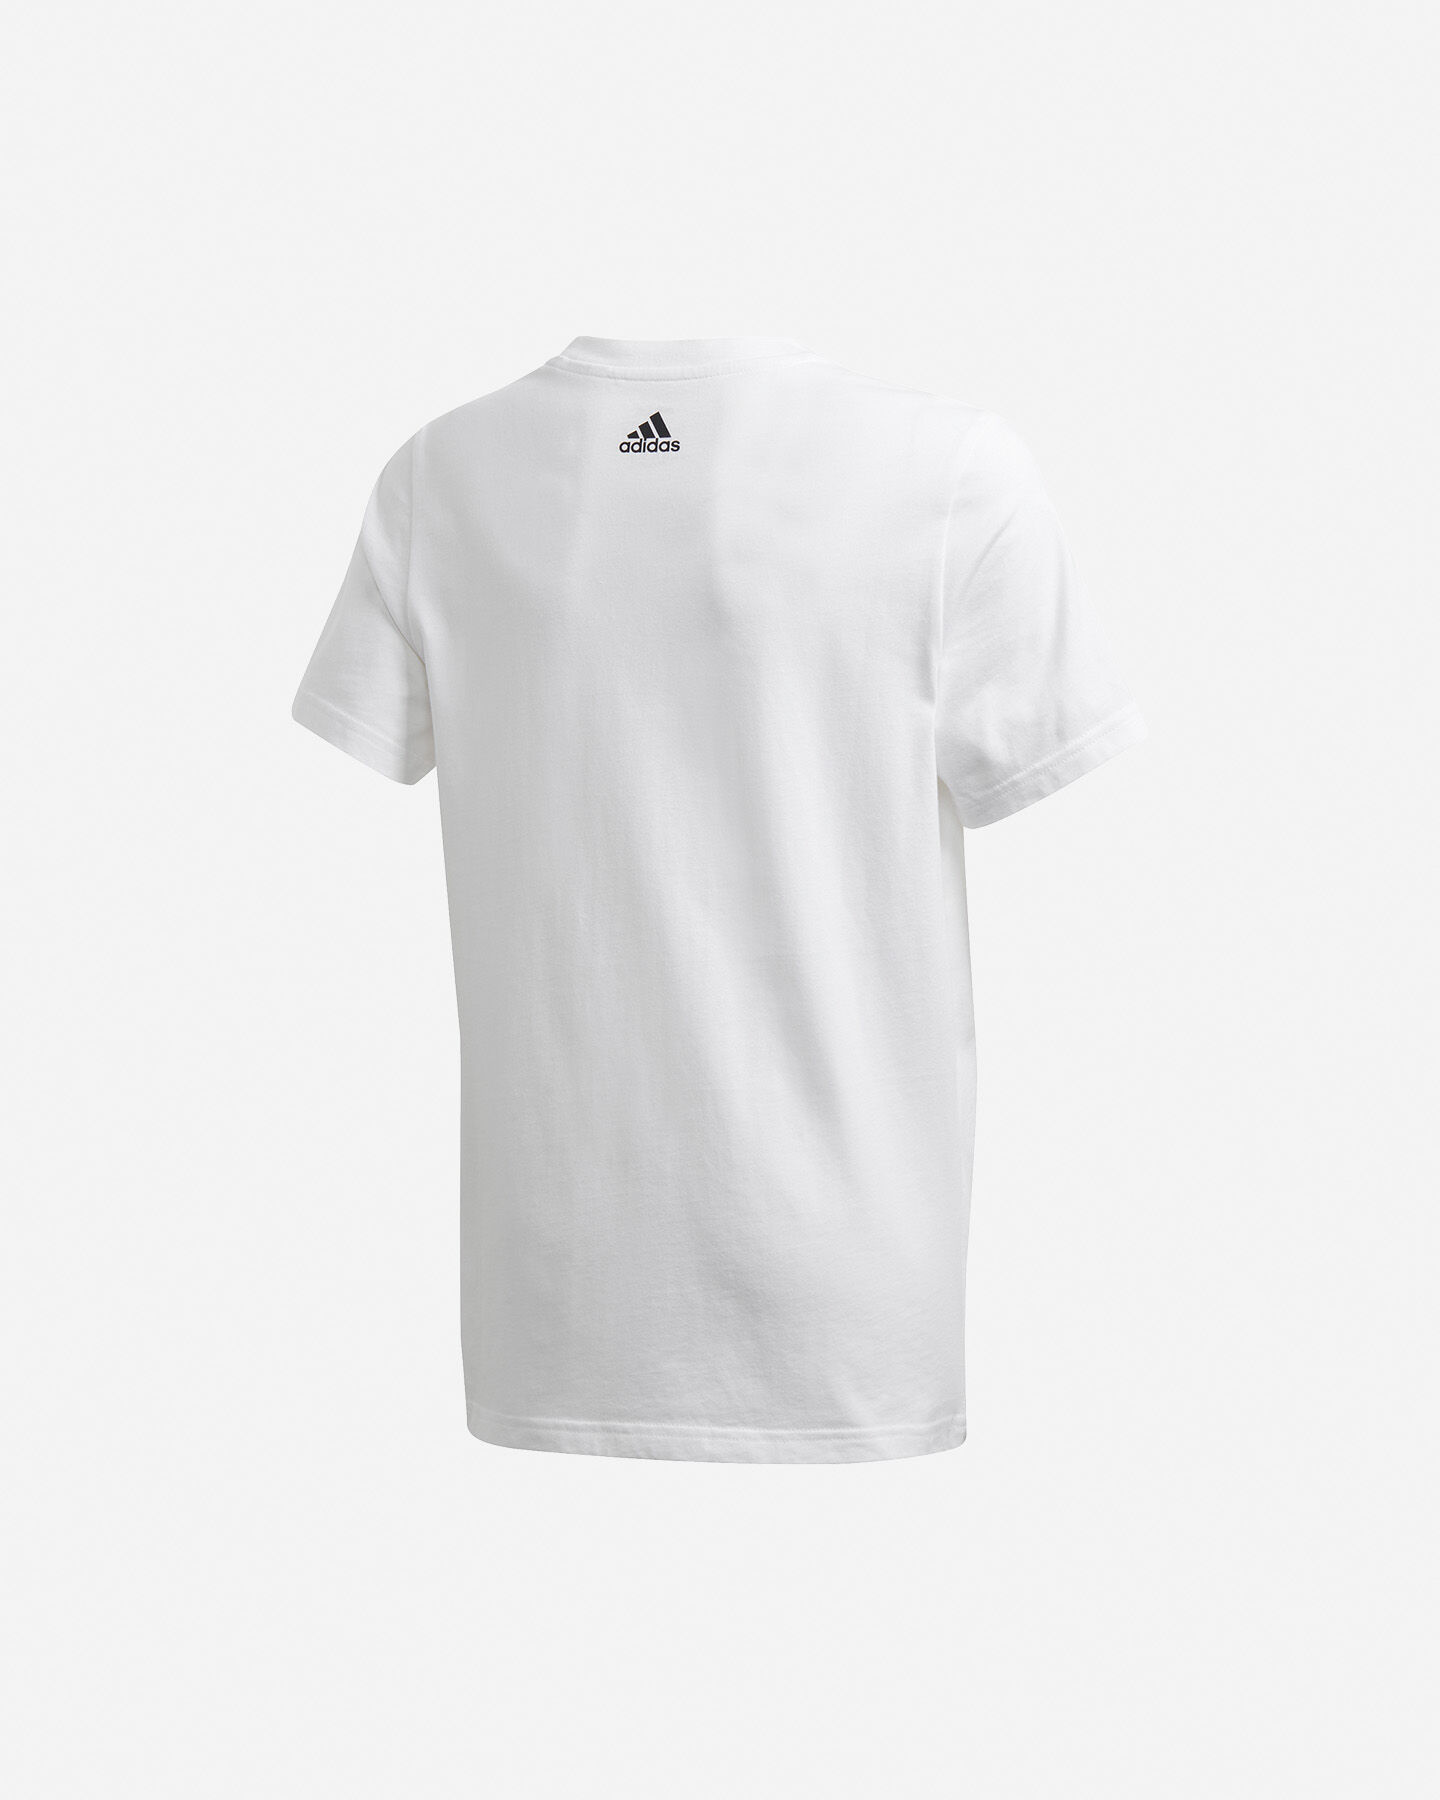  T-Shirt ADIDAS YOUNG BADGE OF SPORT JR S5211338|UNI|7-8A scatto 1